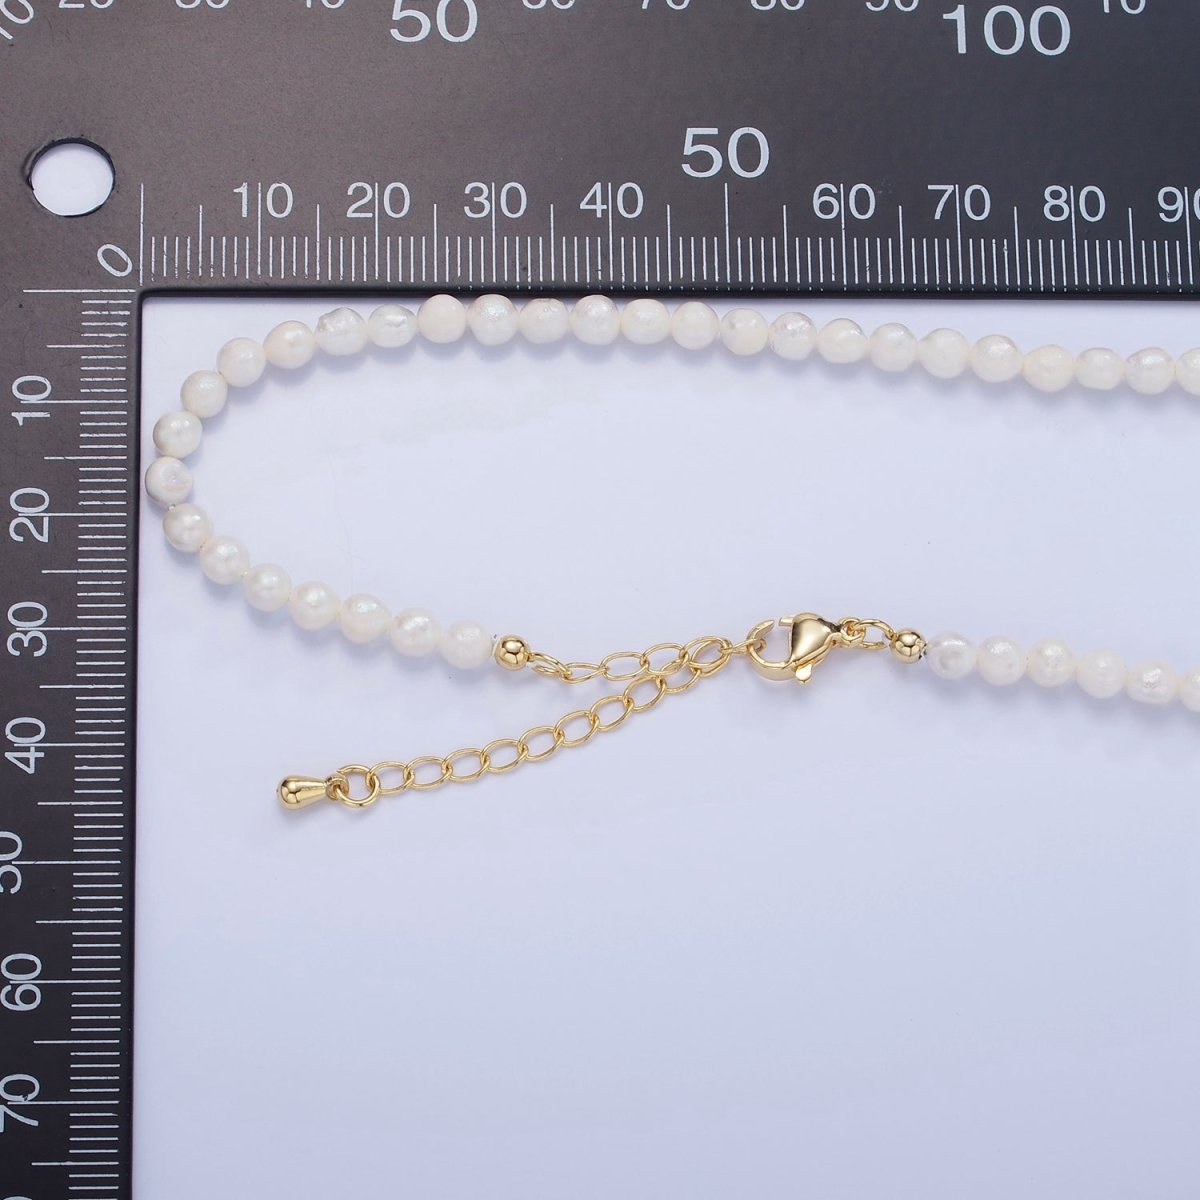 16K Gold Filled 4mm Freshwater Pearl 18 Inch Necklace w. Extender | WA-2499 - DLUXCA